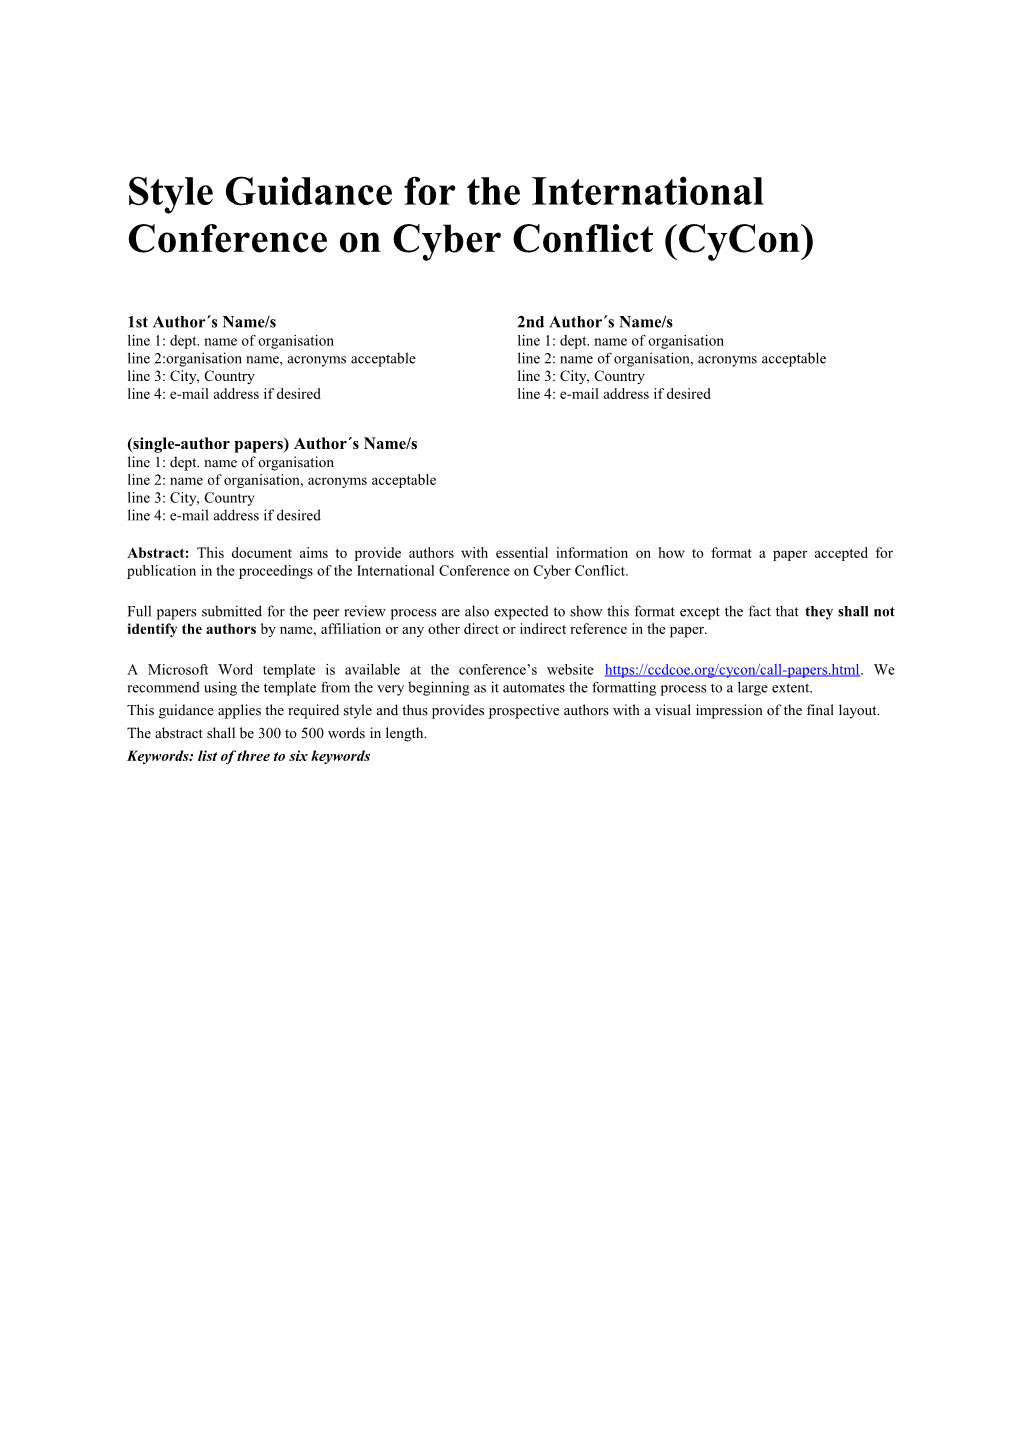 Style Guidance for the International Conference on Cyber Conflict (Cycon)